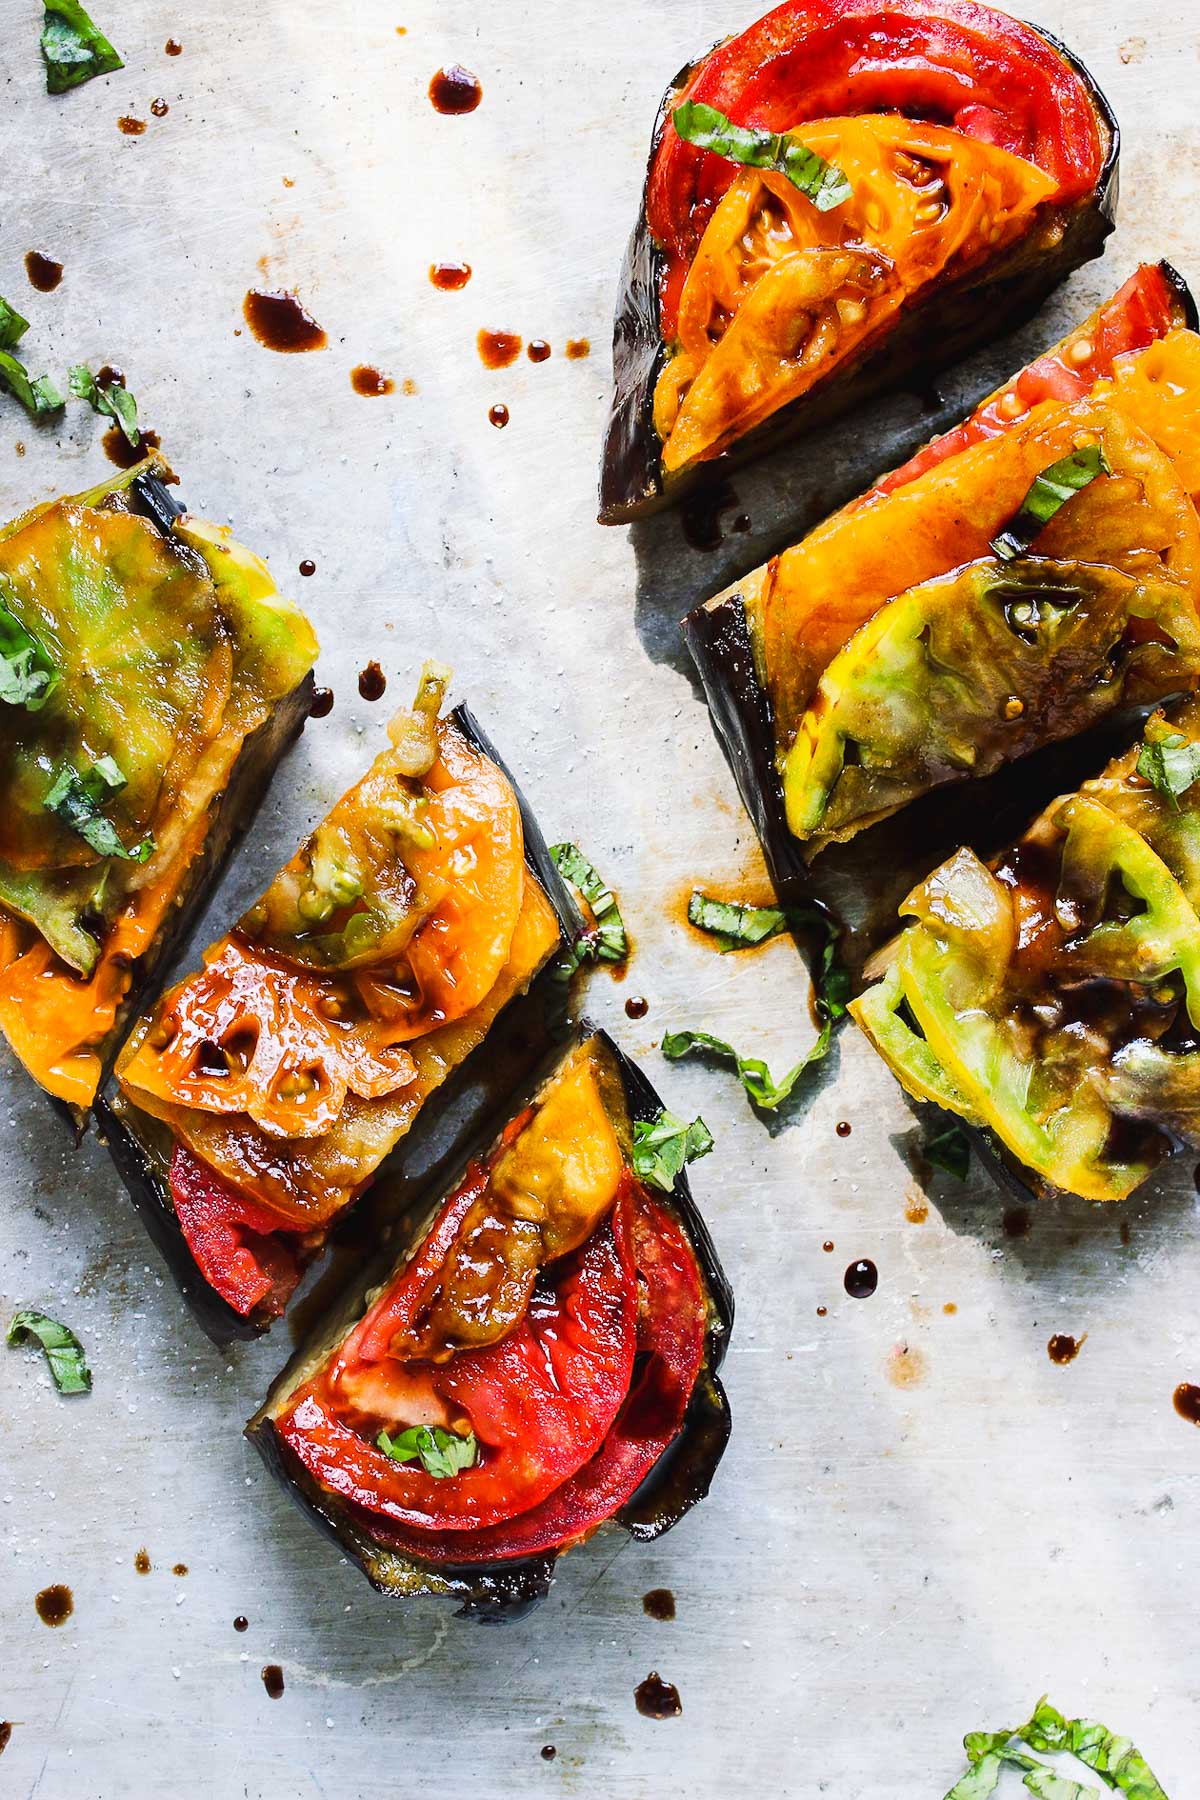 18 END OF SUMMER RECIPES TO MAKE BEFORE FALL